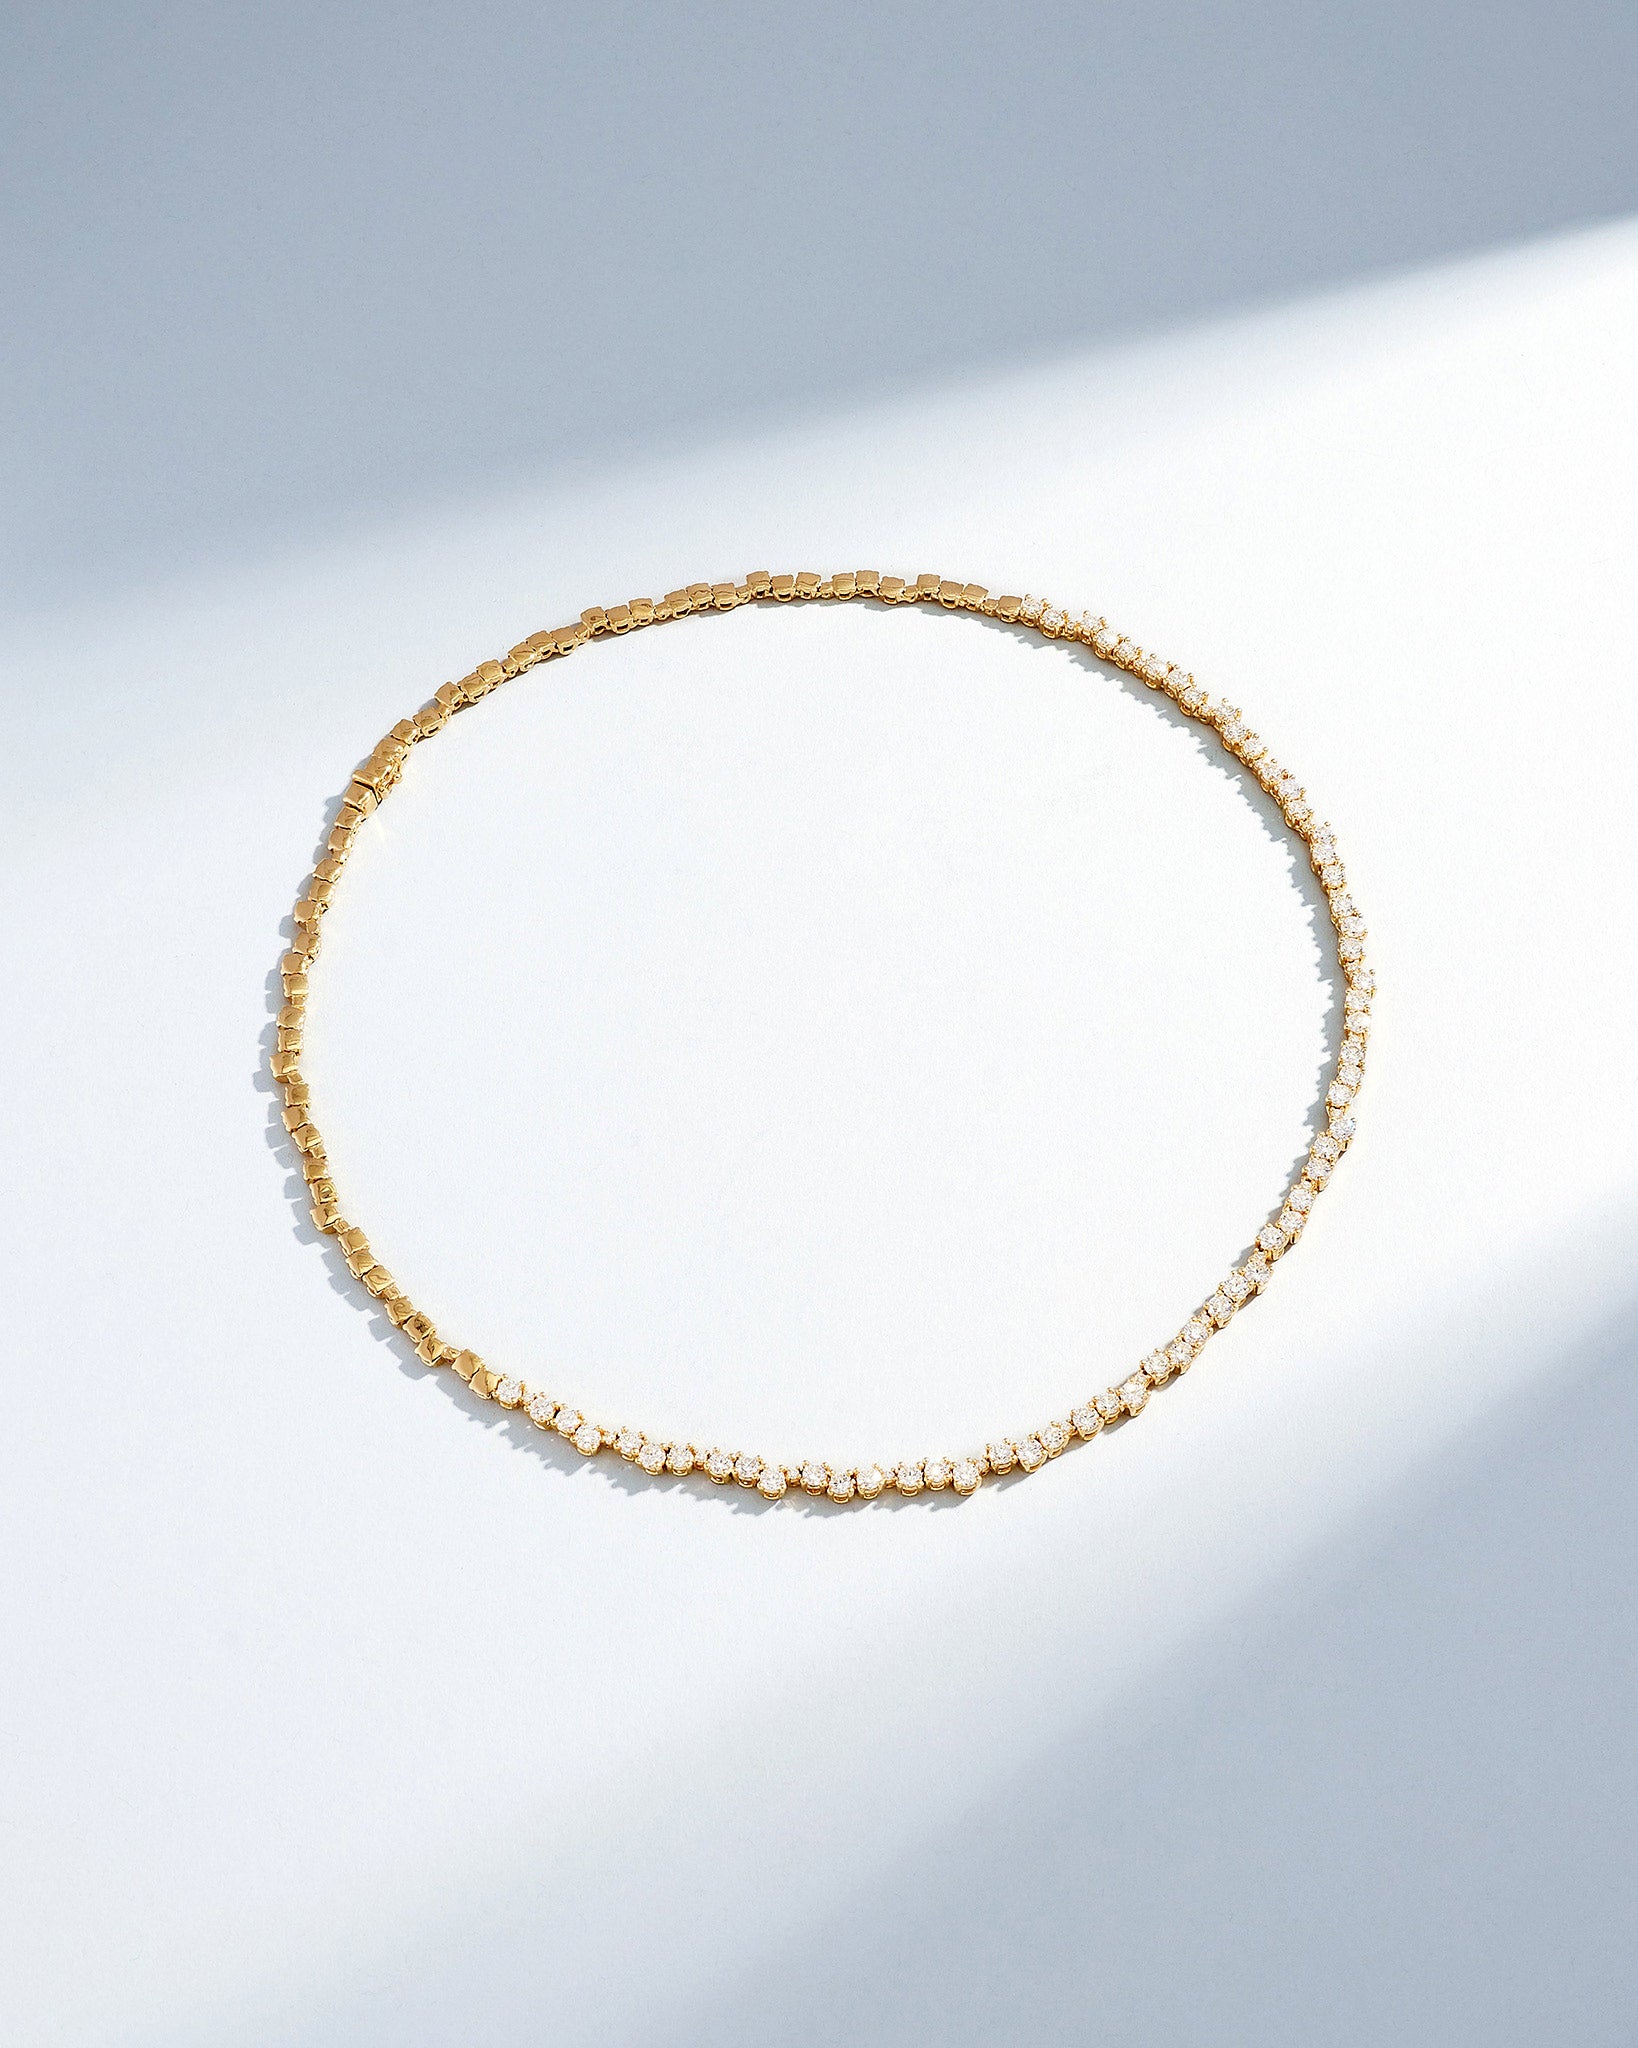 Suzanne Kalan Classic Diamond Round Tennis Necklace in 18k yellow gold